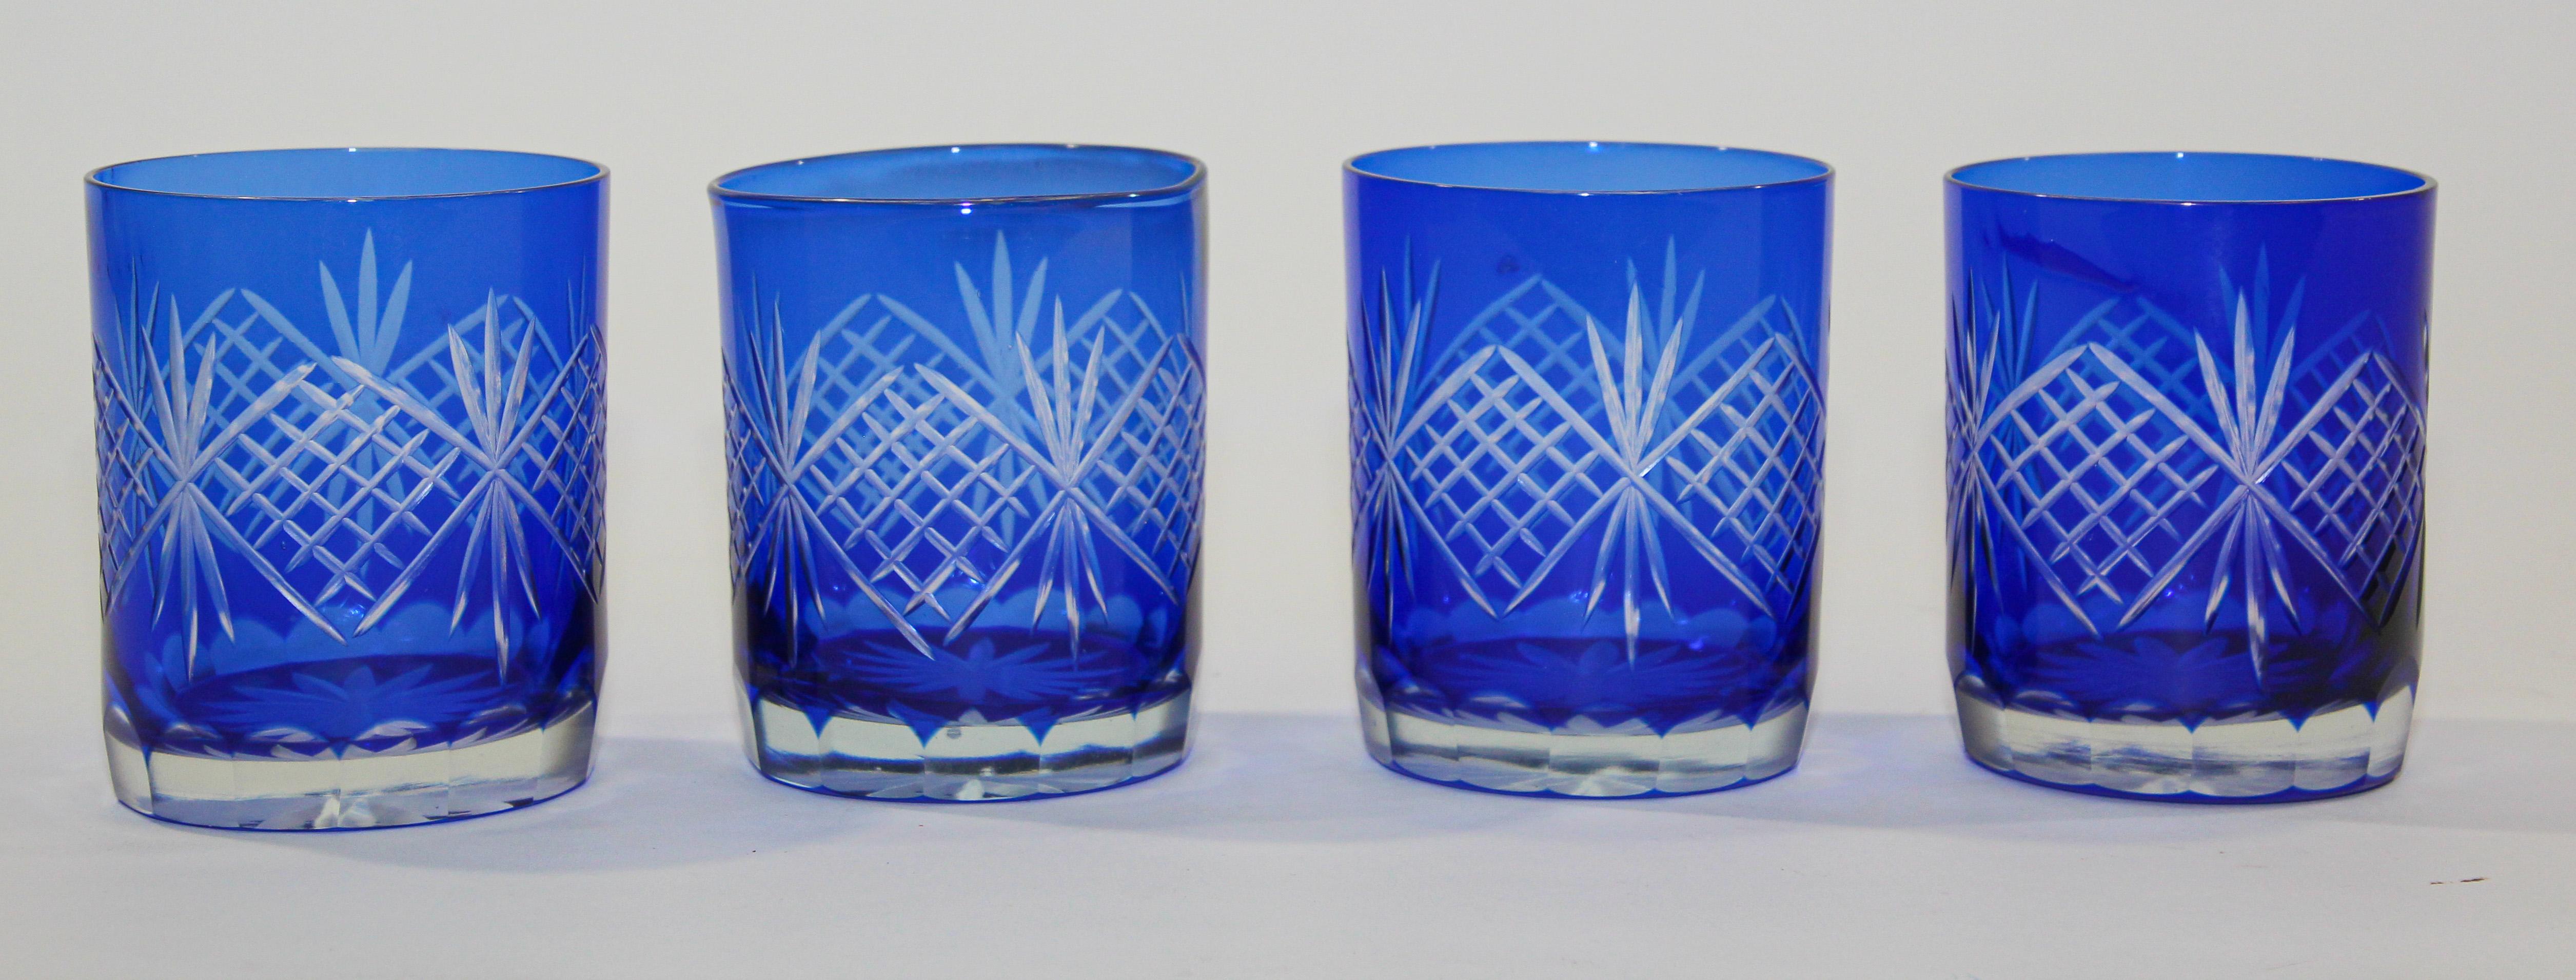 Set of four vintage whiskey glasses tumbler cobalt blue crystal Baccarat style. 
The vibrant hand blown rich sapphire blue jewel sapphire blue crystal glass is cut to clear to reveal a lovely pattern with clean lines. 
Set of rock whiskey juice or